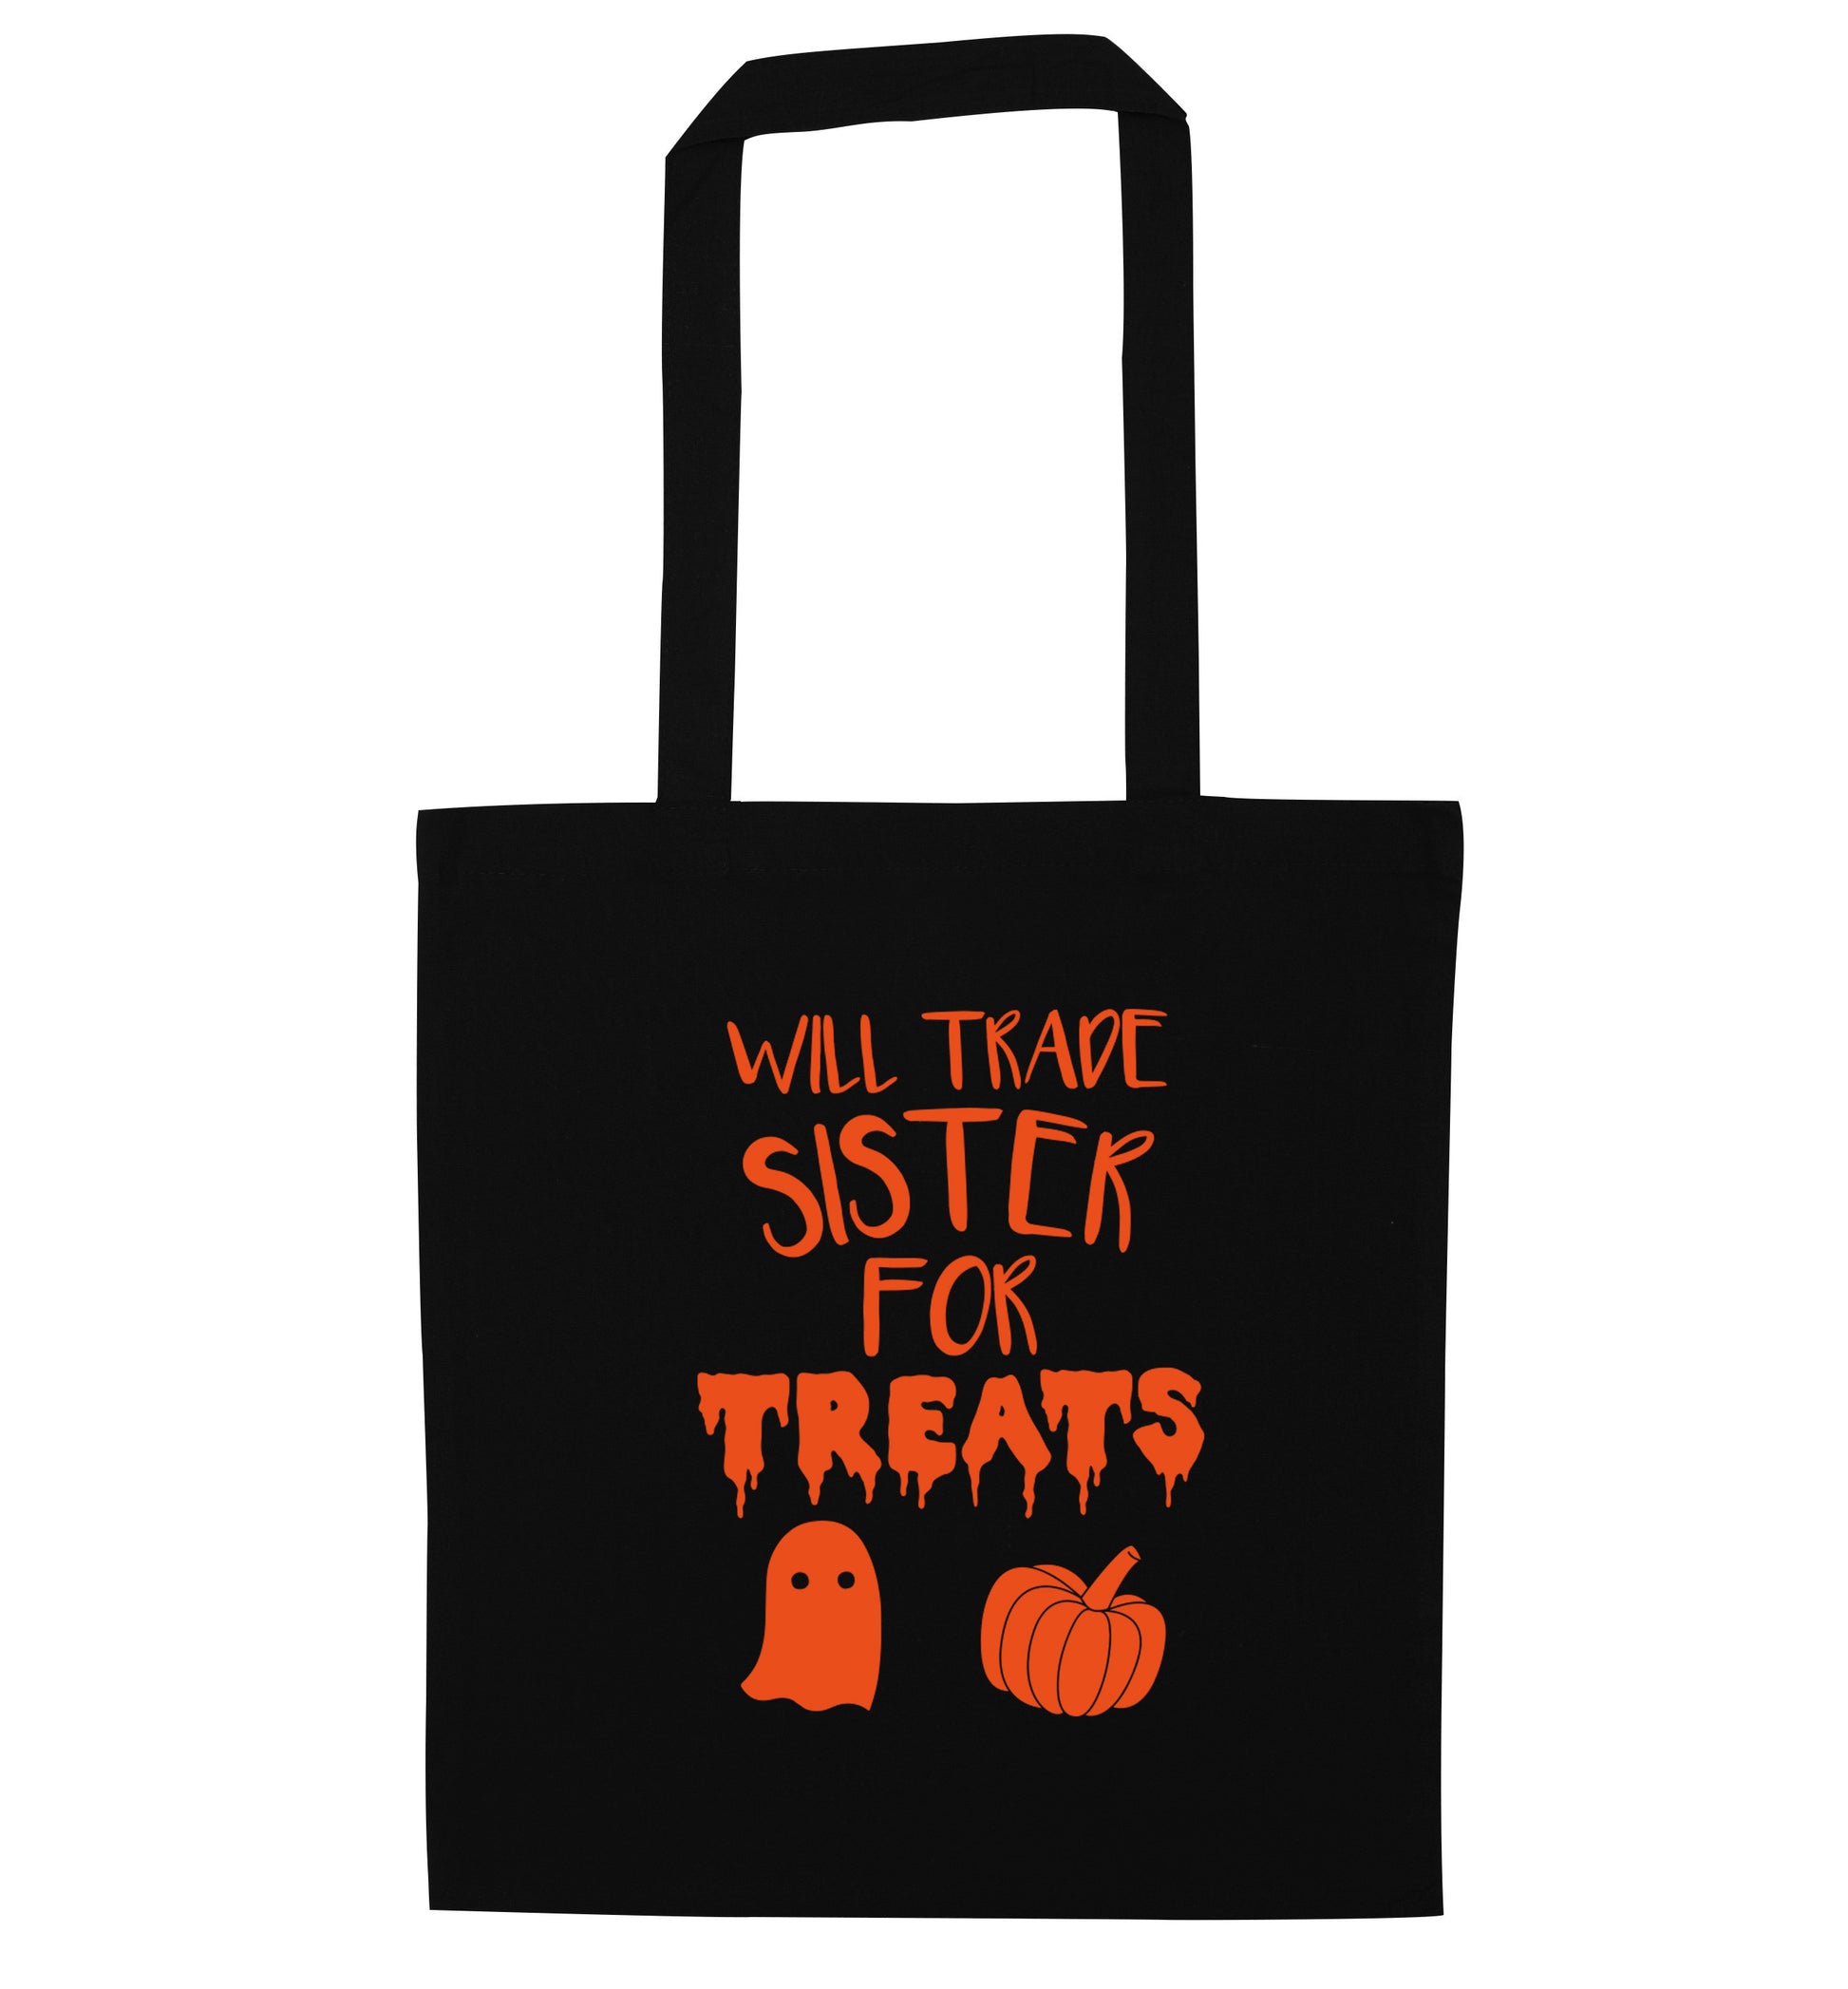 Will trade sister for treats black tote bag